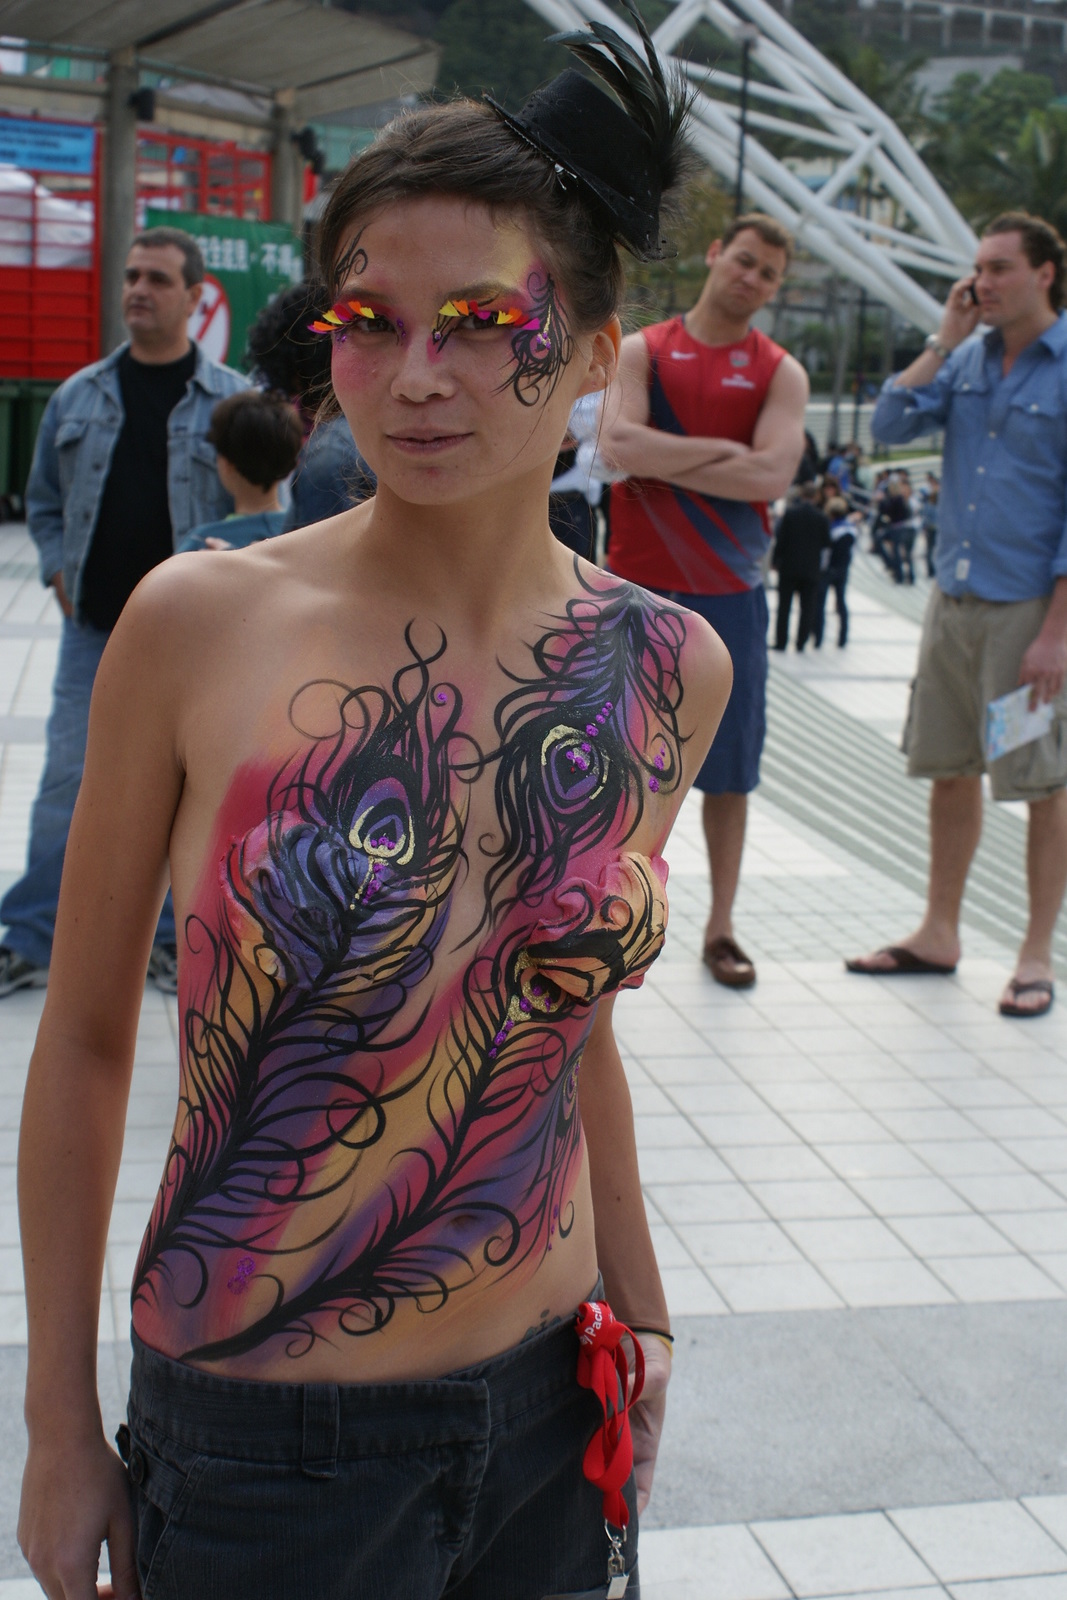 christina mull recommends big tits body painting pic